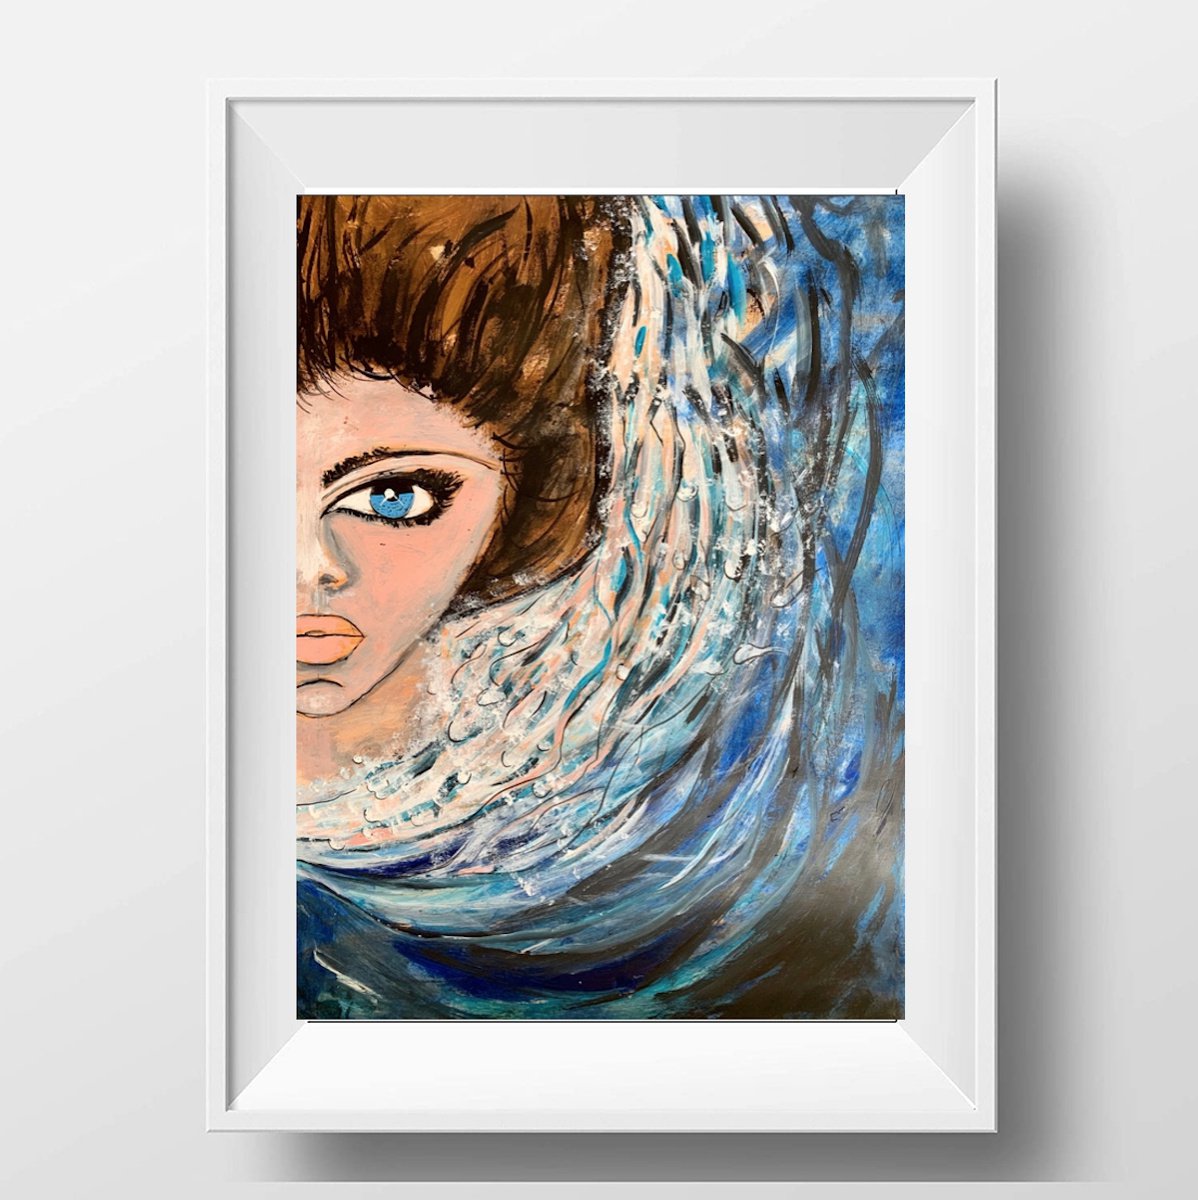 Floating on Water Acrylic Painting Realistic Water Artwork On Paper Home Decor Gift Ideas by Kumi Muttu